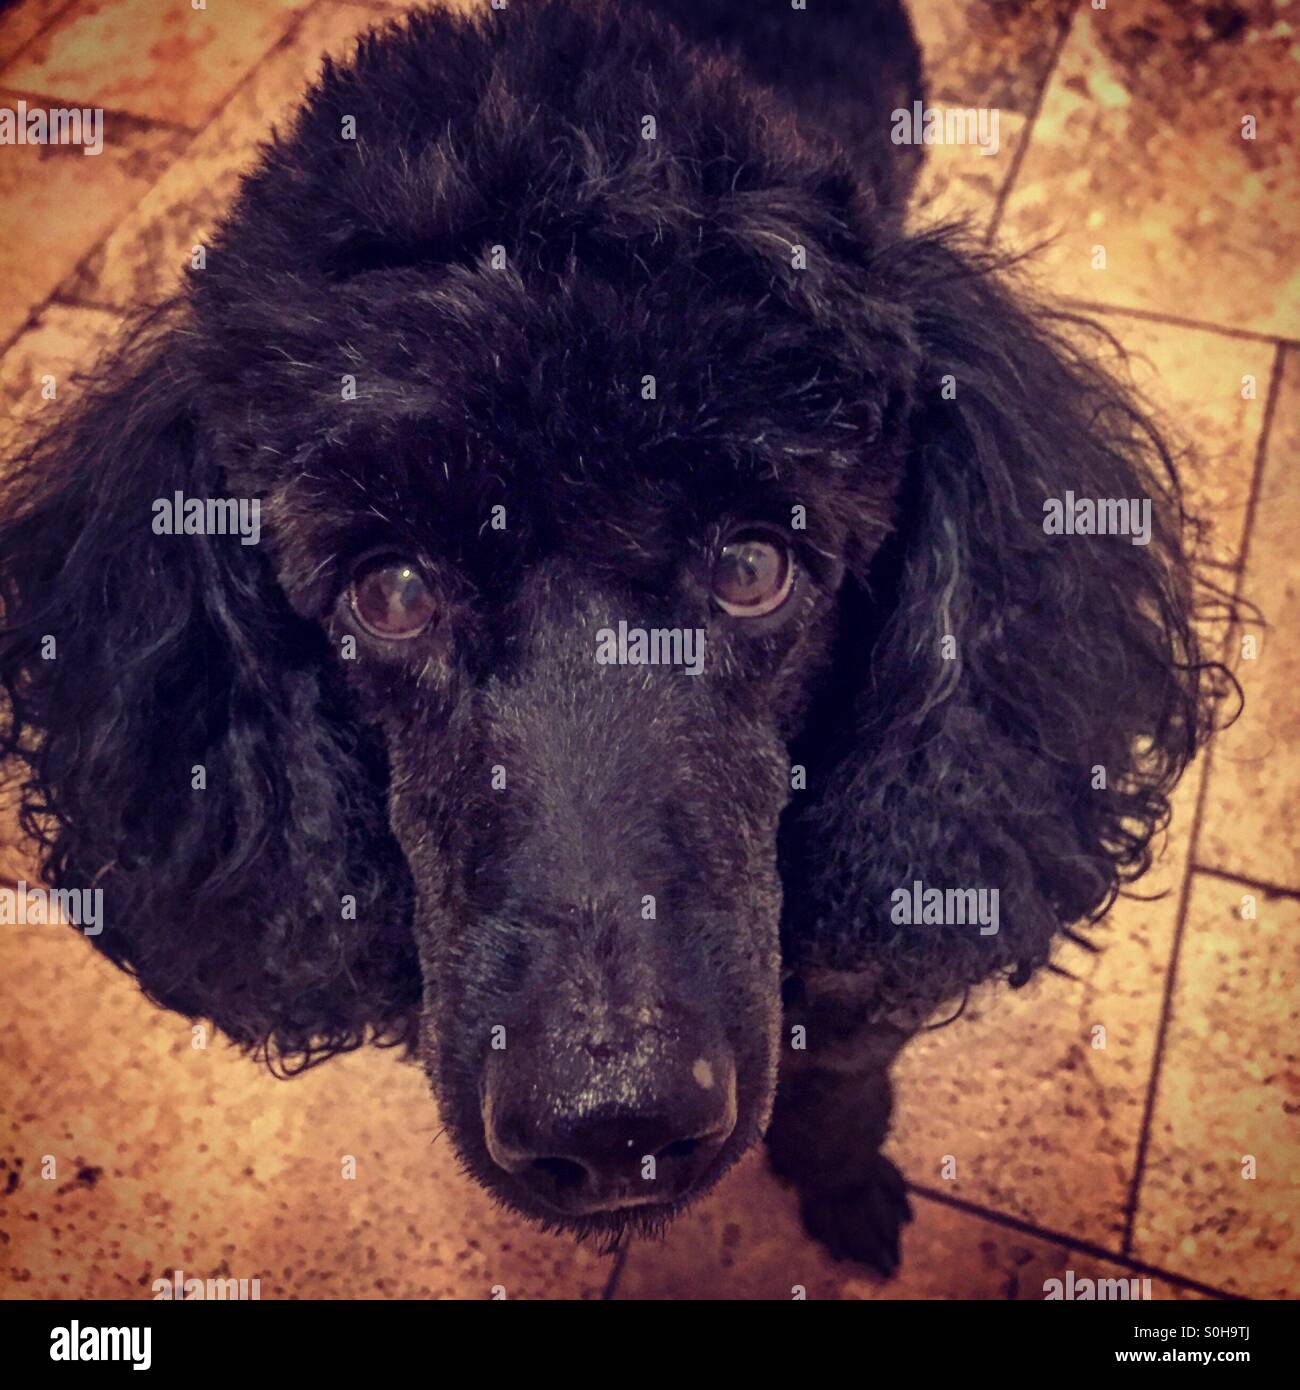 Black miniature poodle looking up at me. Stock Photo